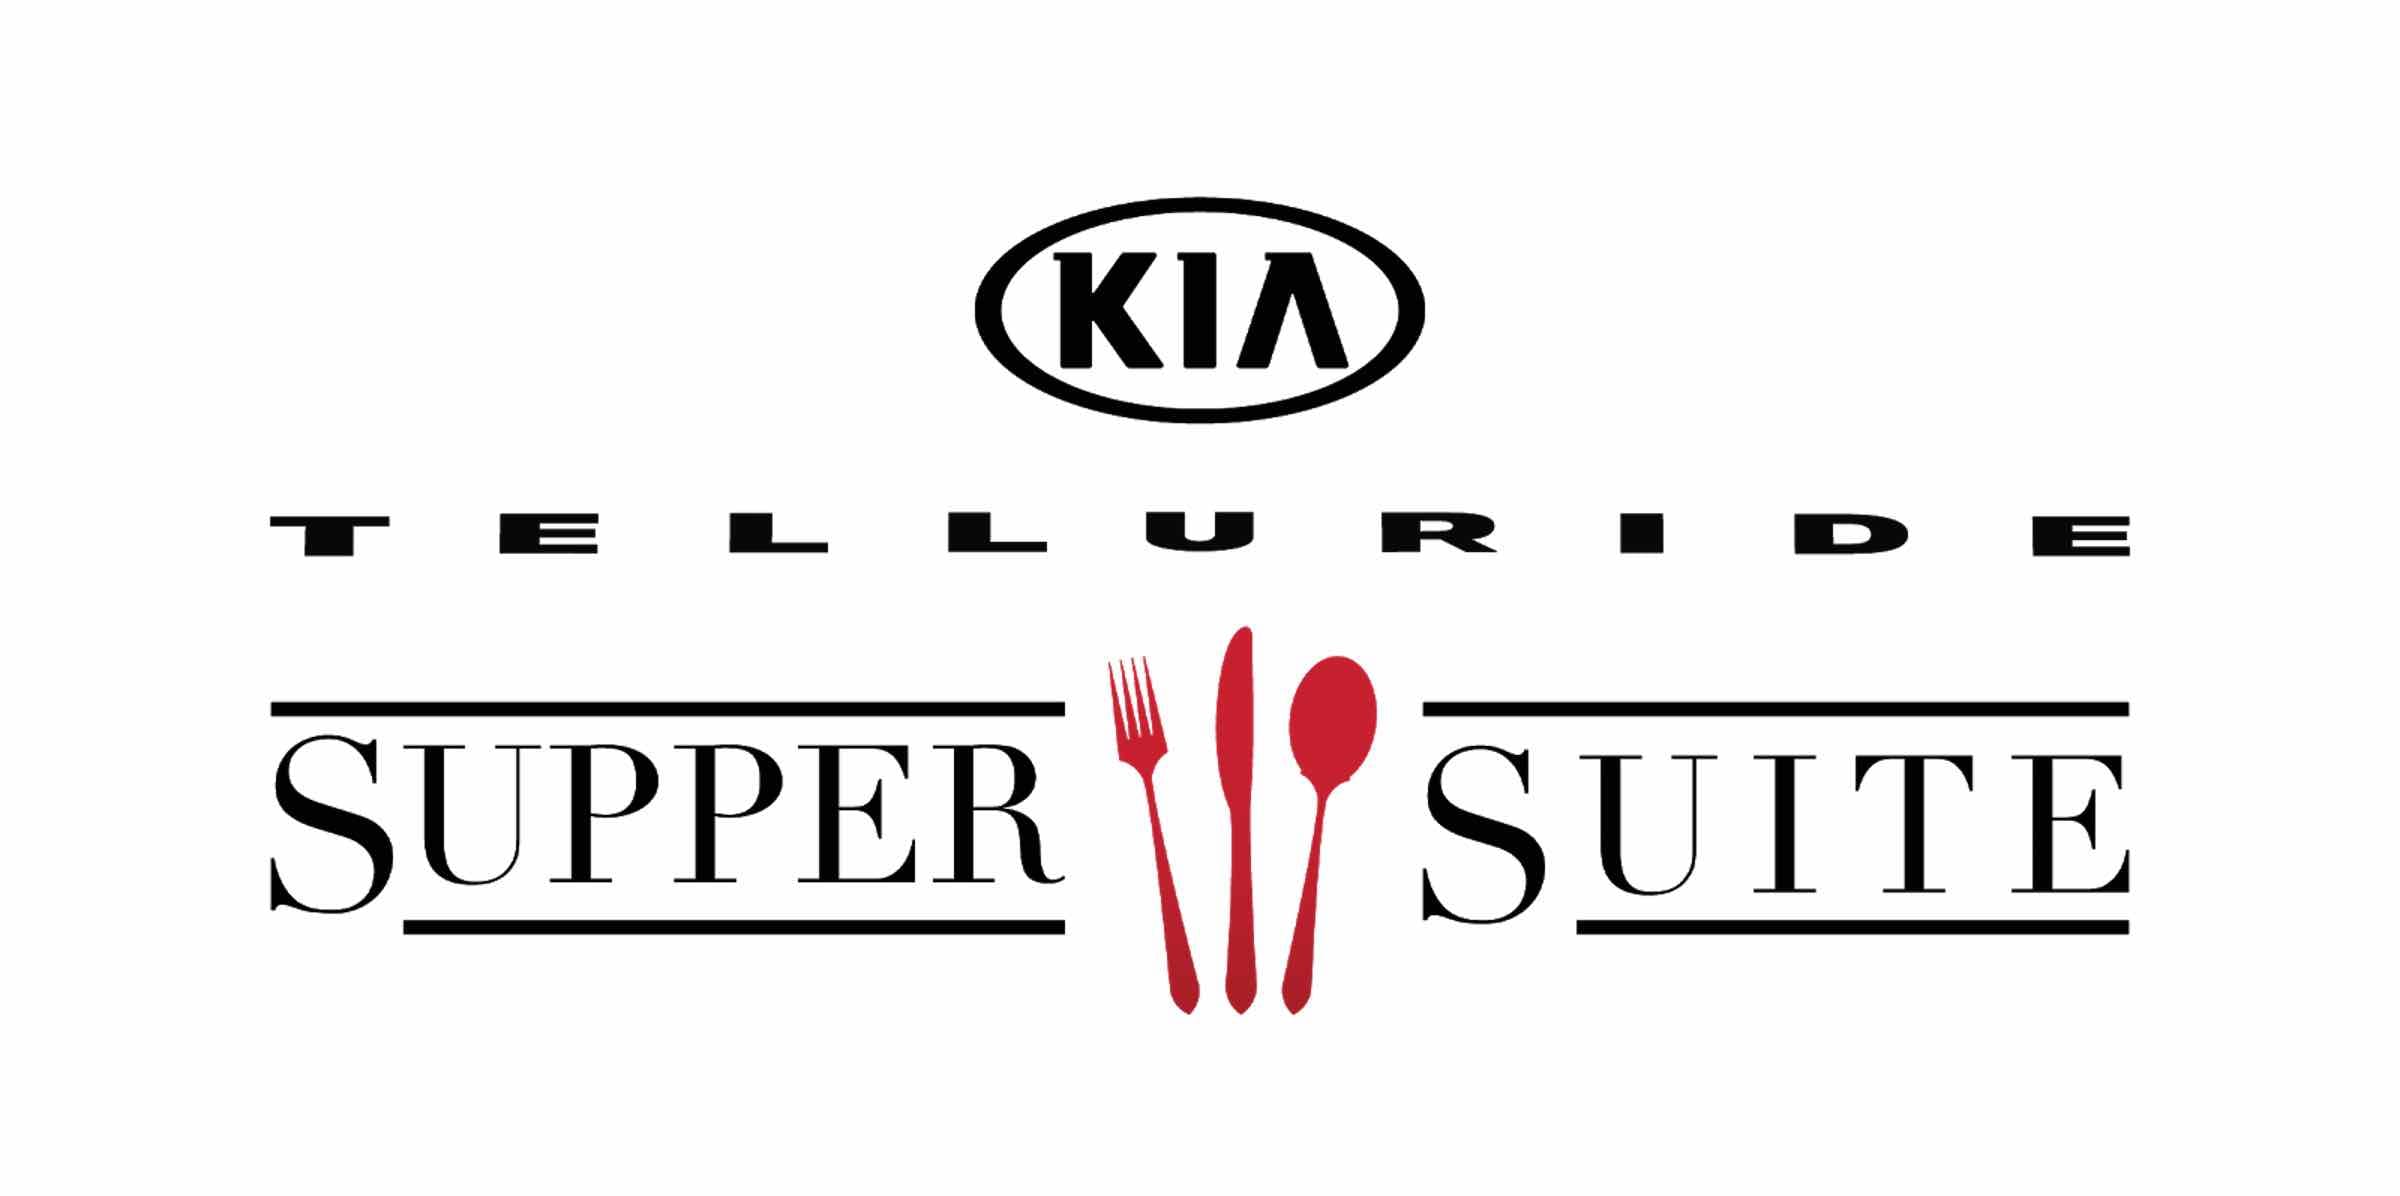 A-List Communications is bringing it’s “Supper Suite” back to Park City for the 2020 Sundance Film Festival. Let's take a look at the killer lounge.